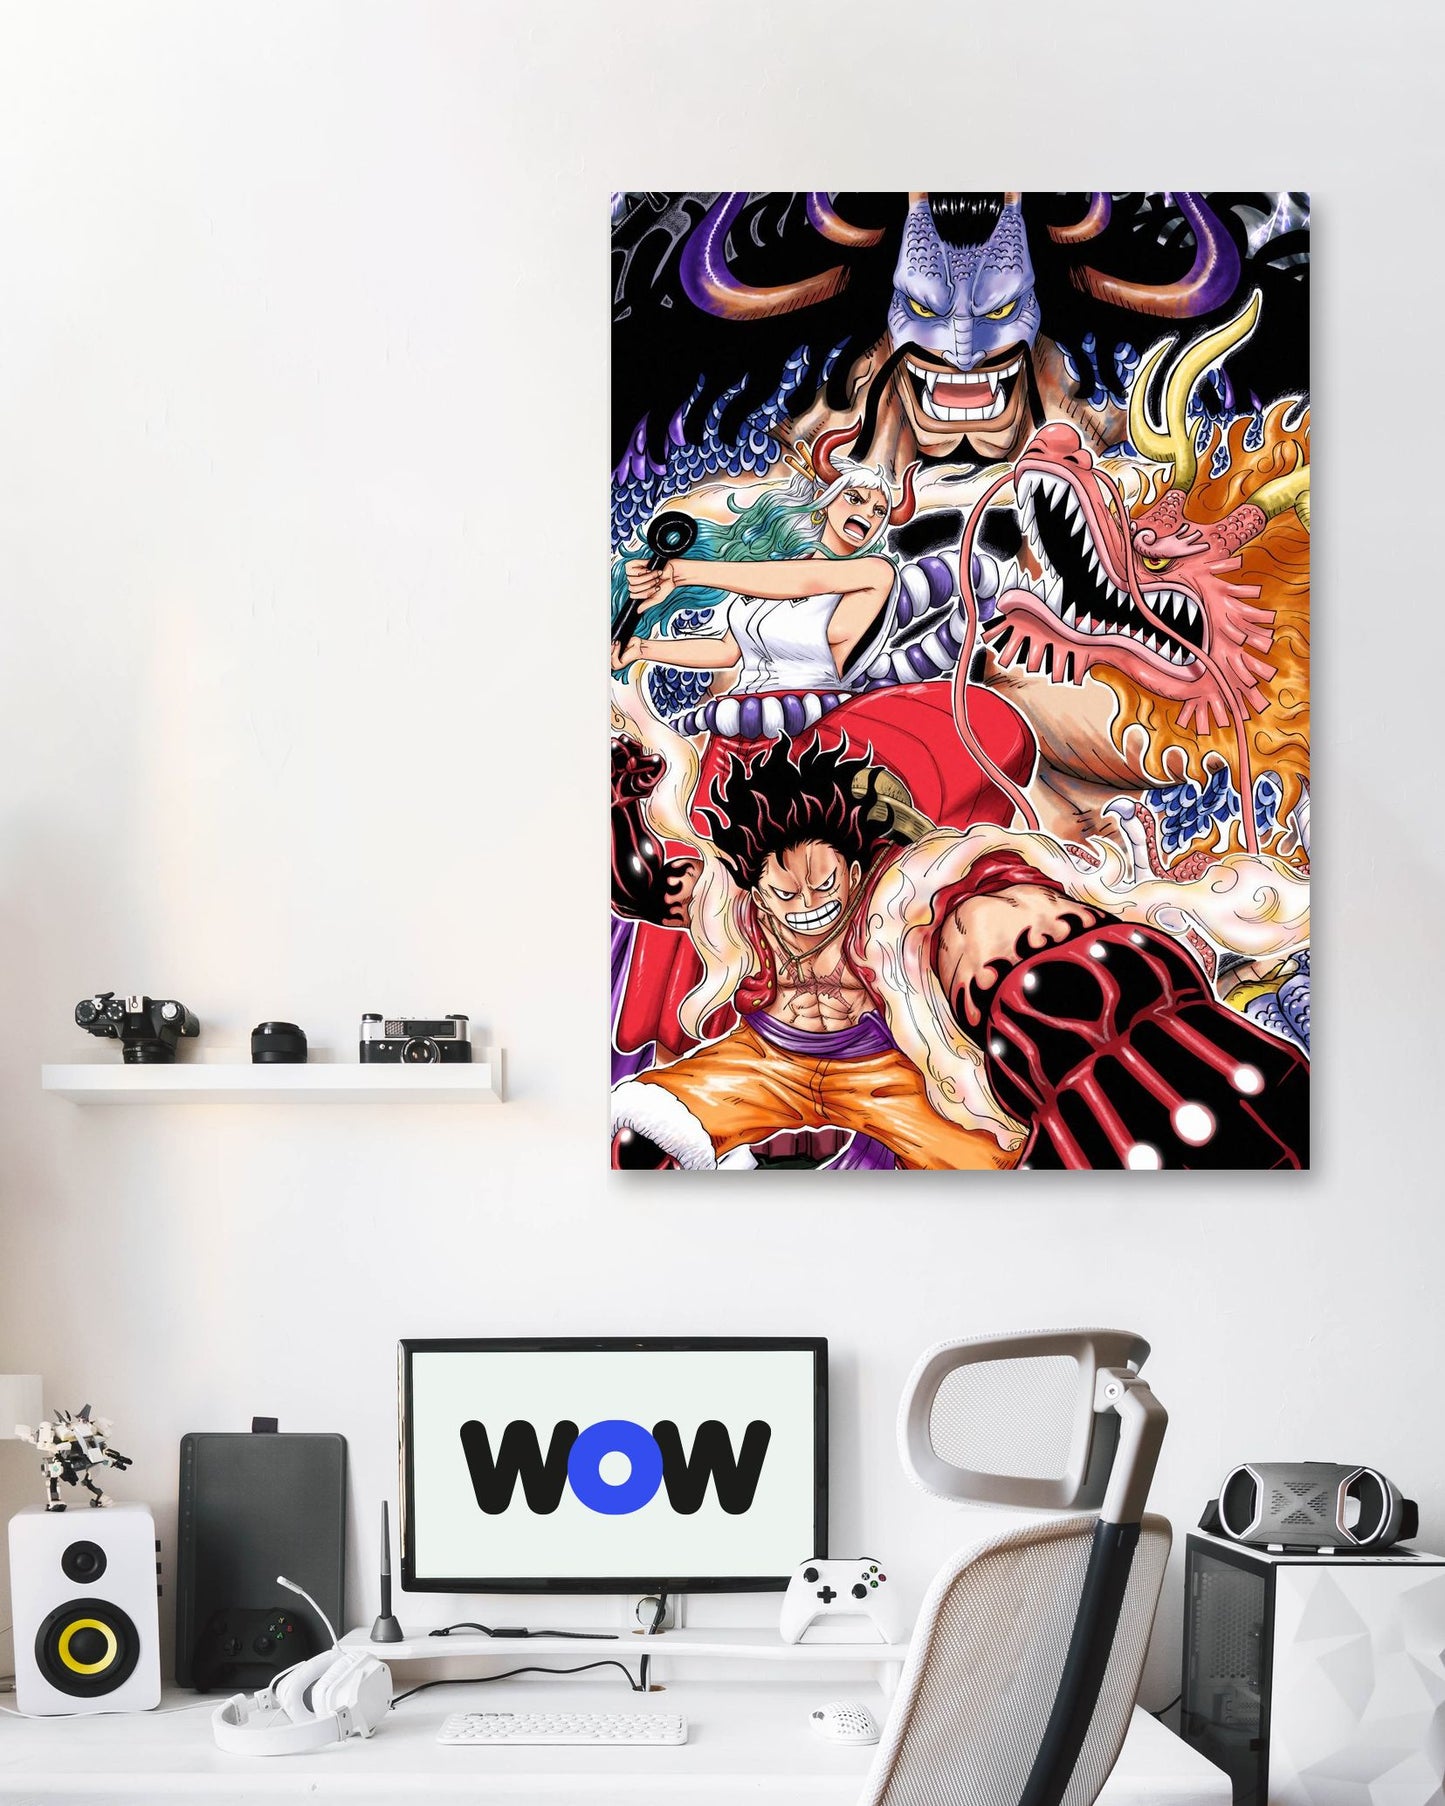 One piece 8 - @UPGallery